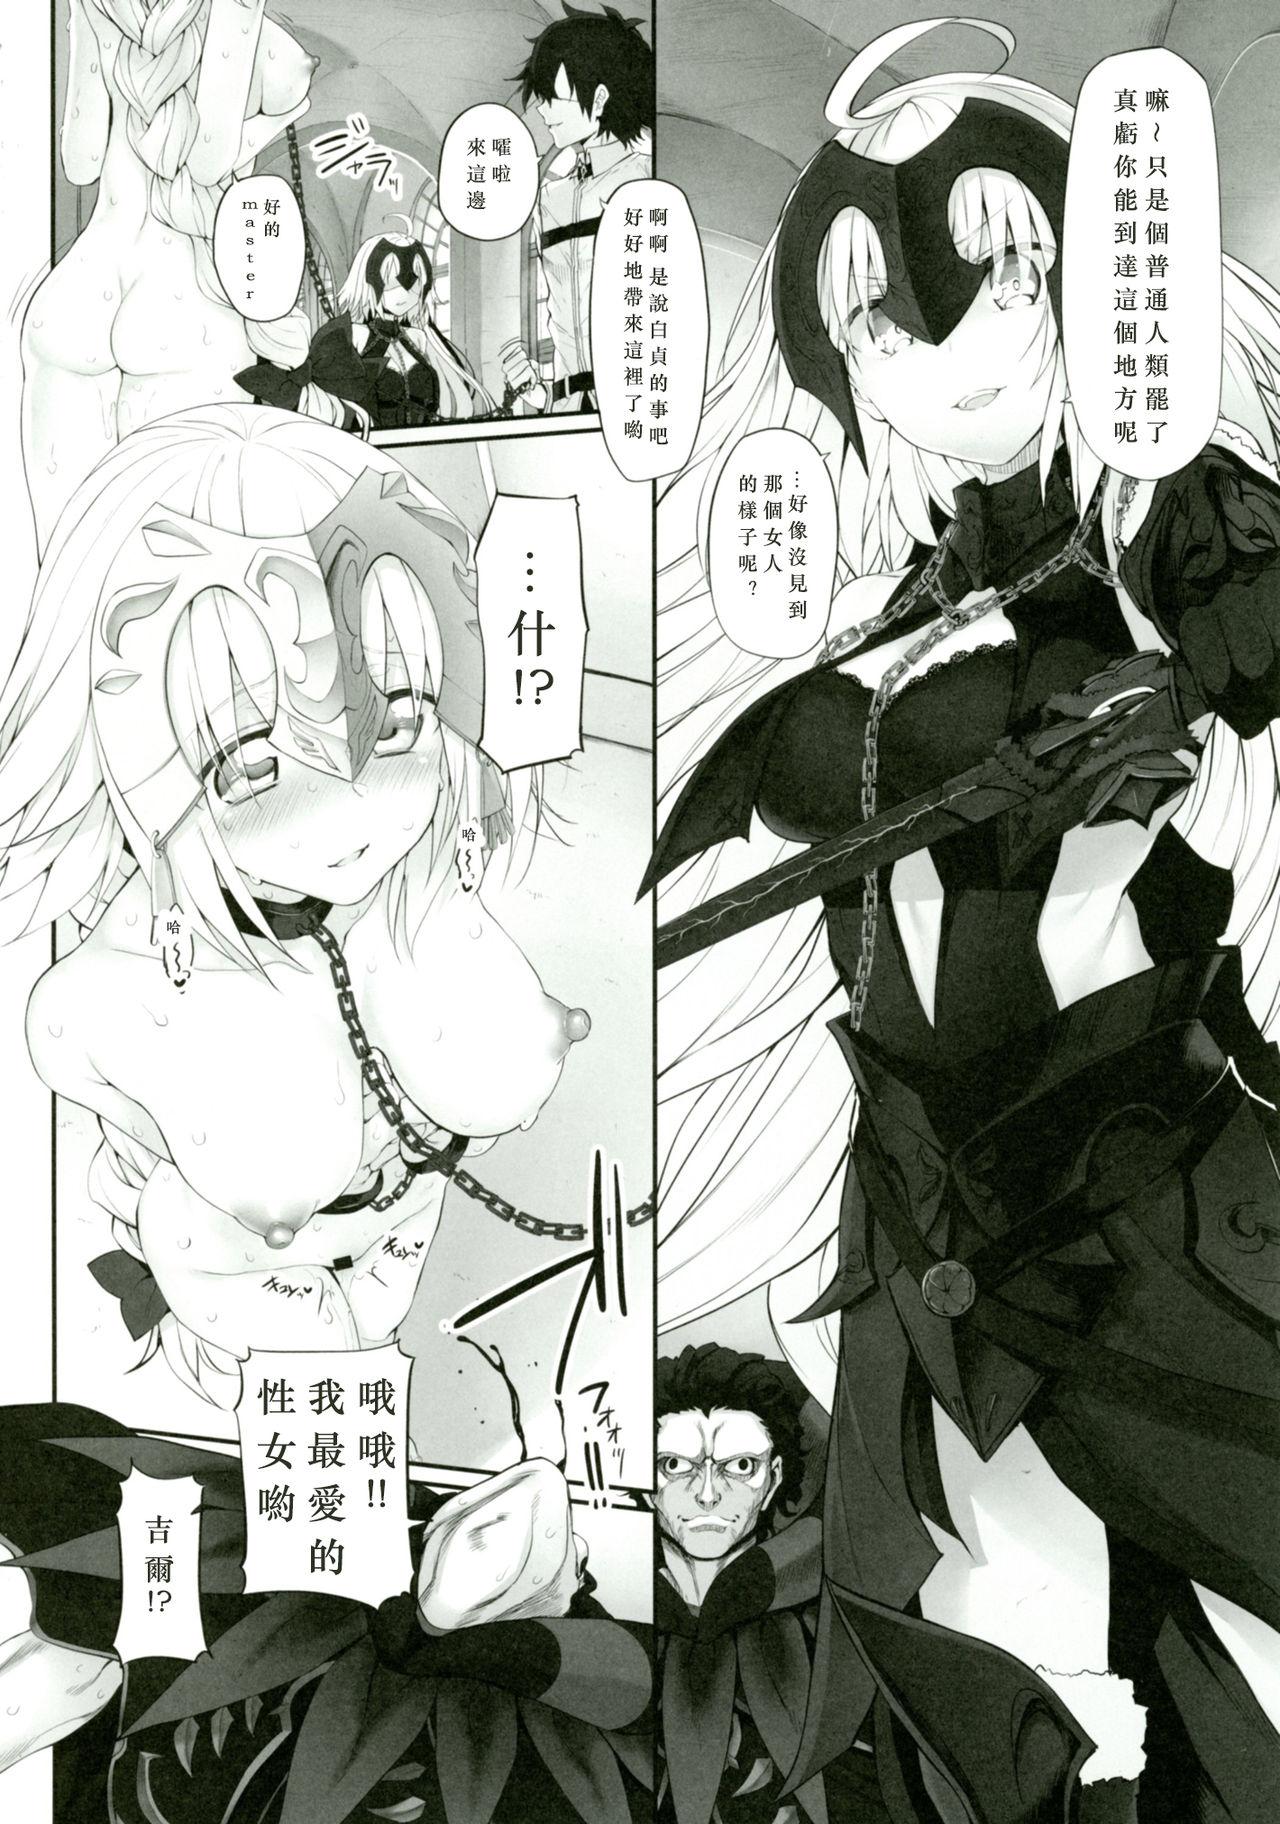 Dance Marked Girls Vol. 14 - Fate grand order Blackwoman - Page 6